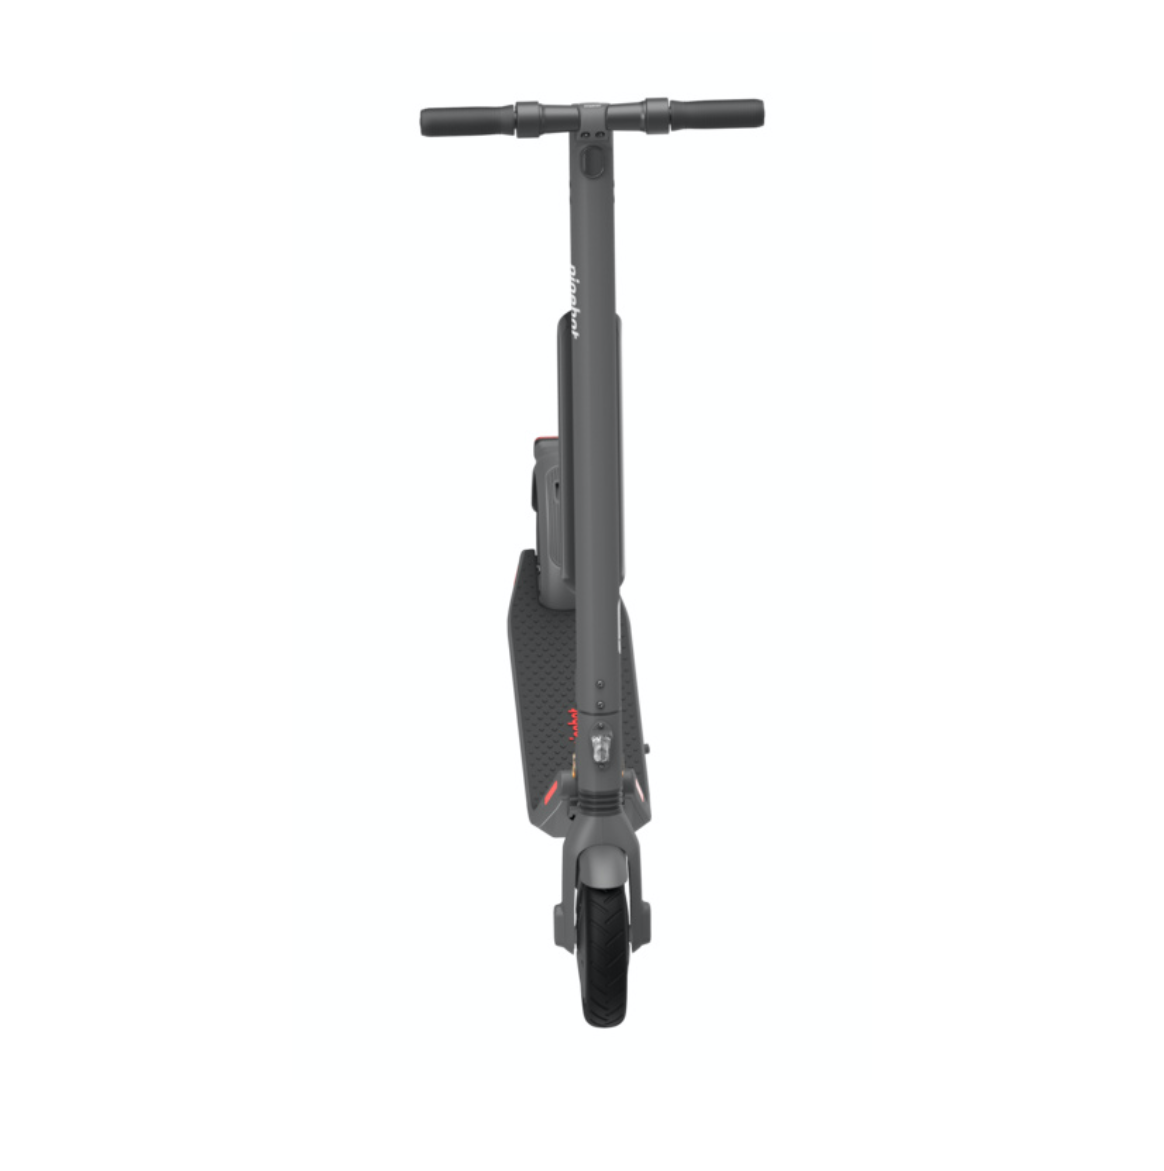 Scooter Watt by Elektro E-Scooter Toolbrothers Roller 300 Ninebot – Kick Segway E45D